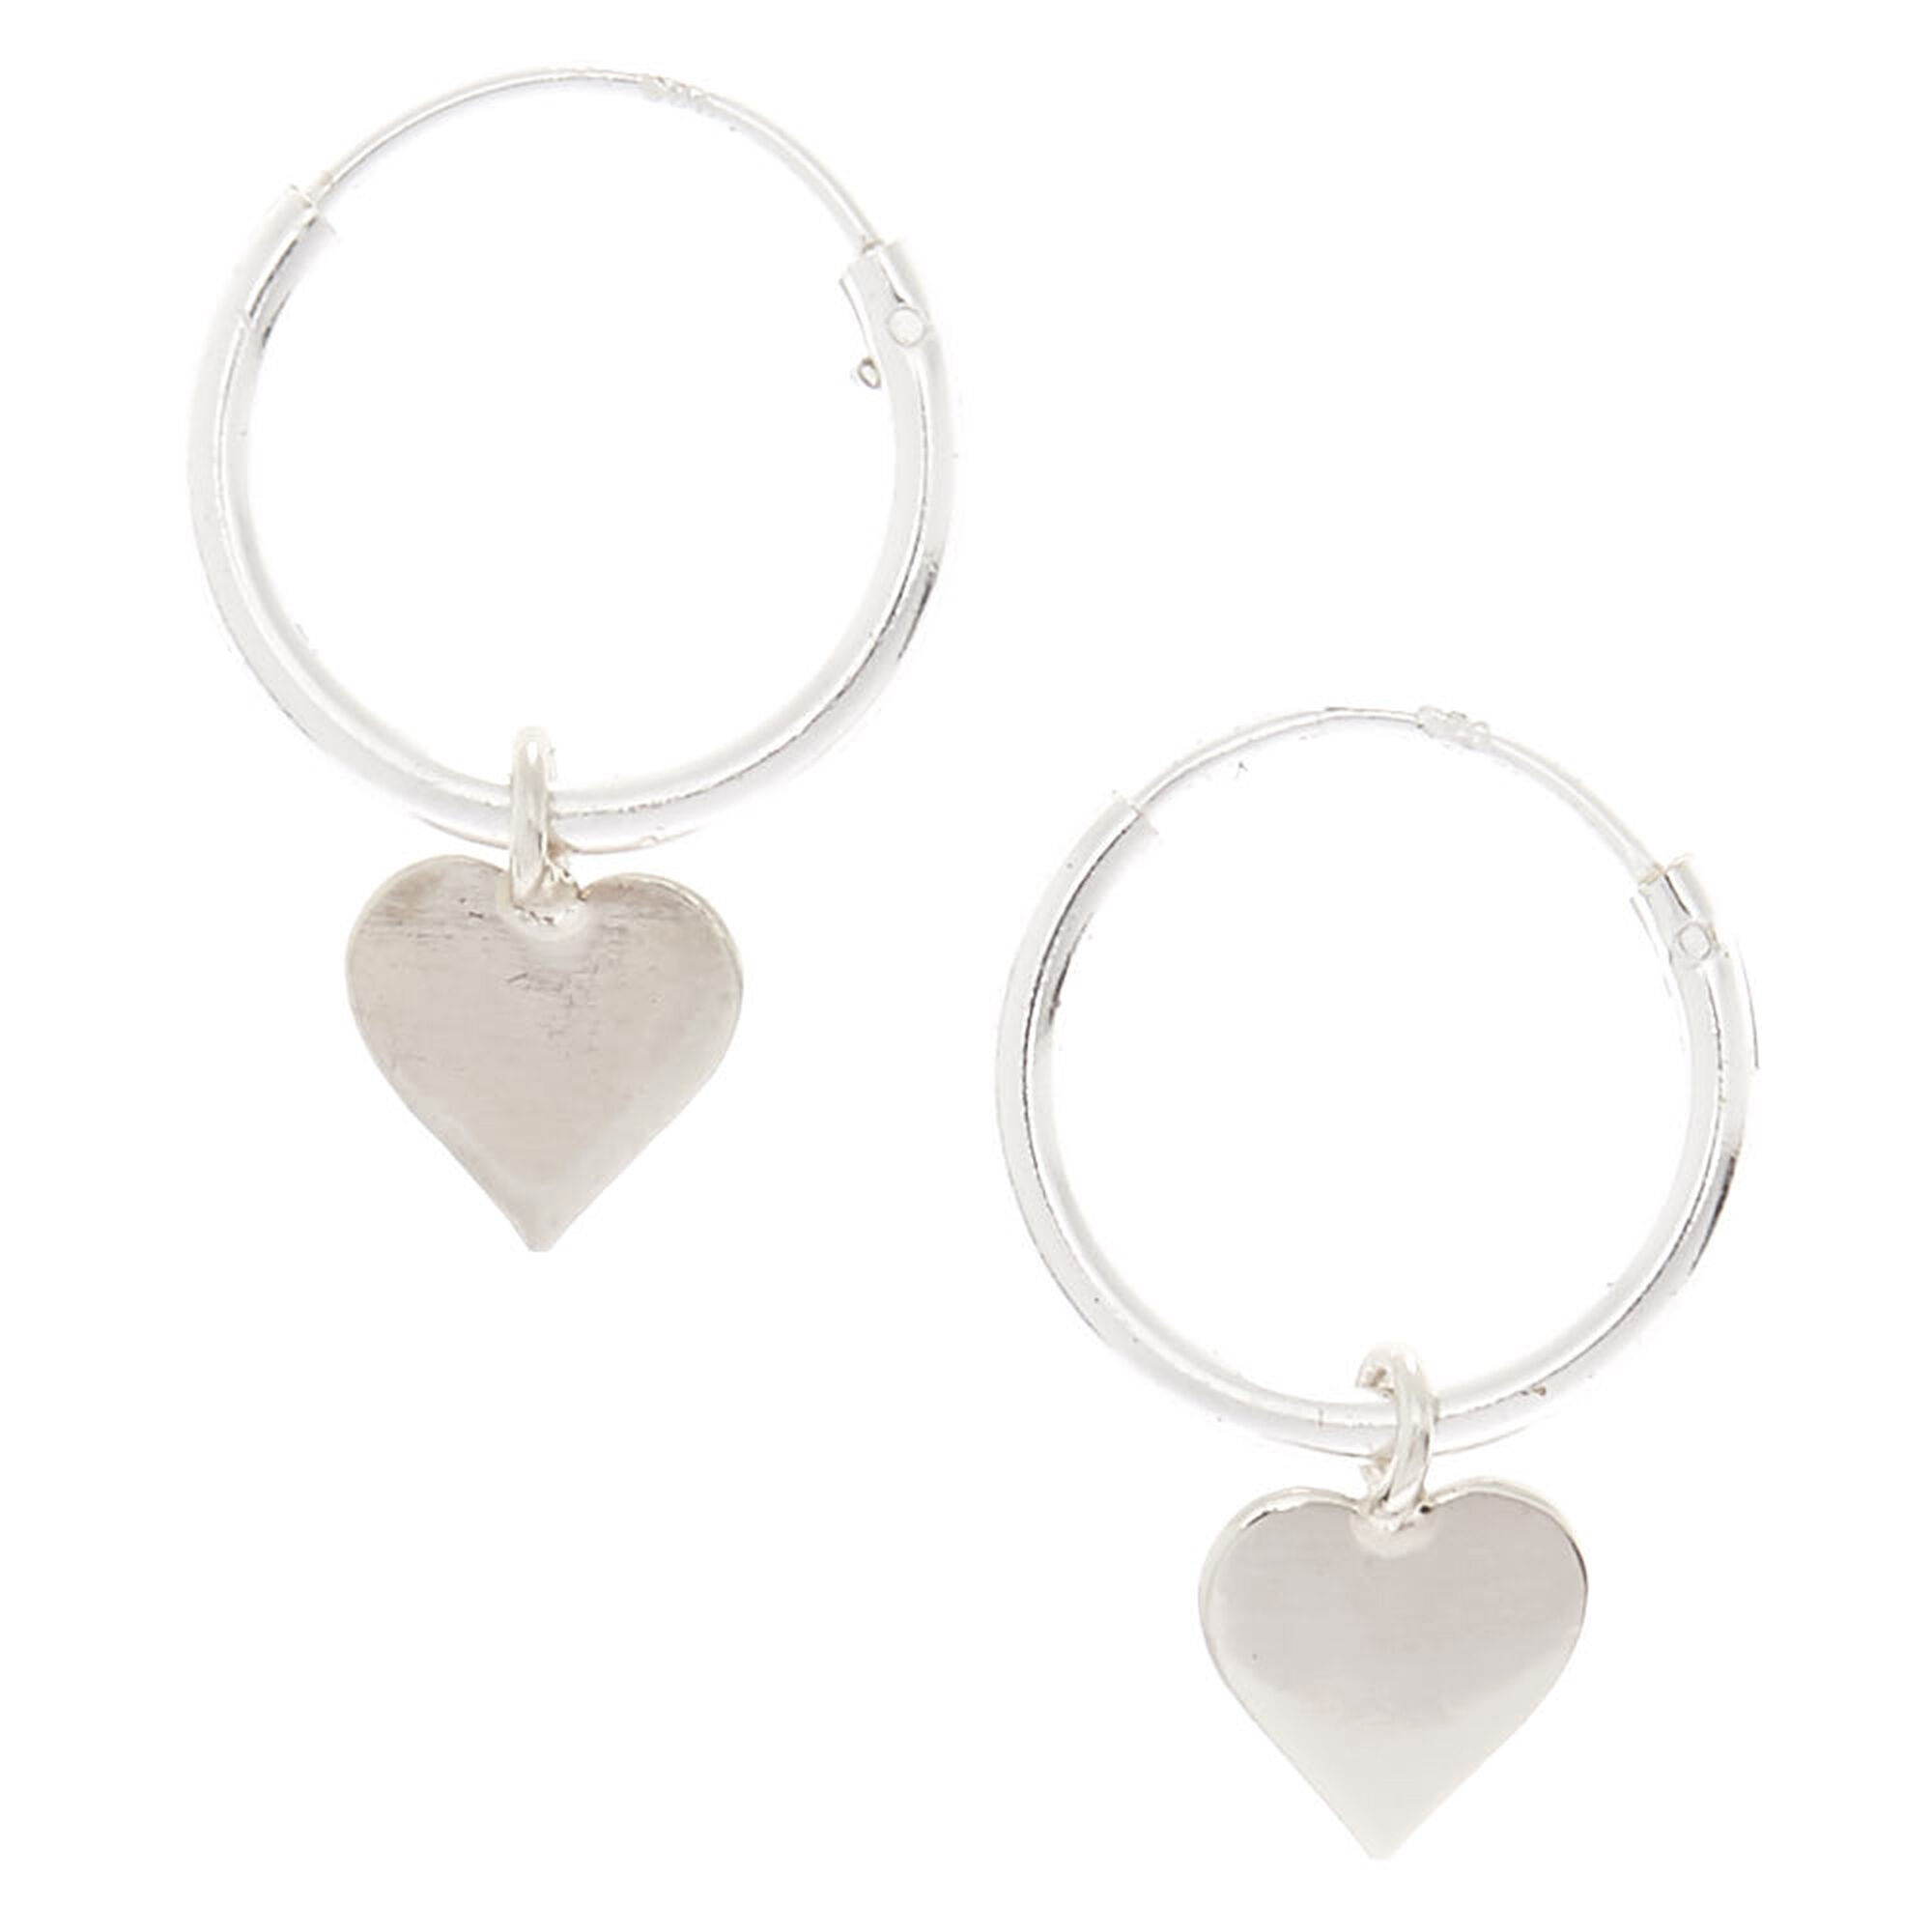 View Claires 12MM Heart Hoop Earrings Silver information